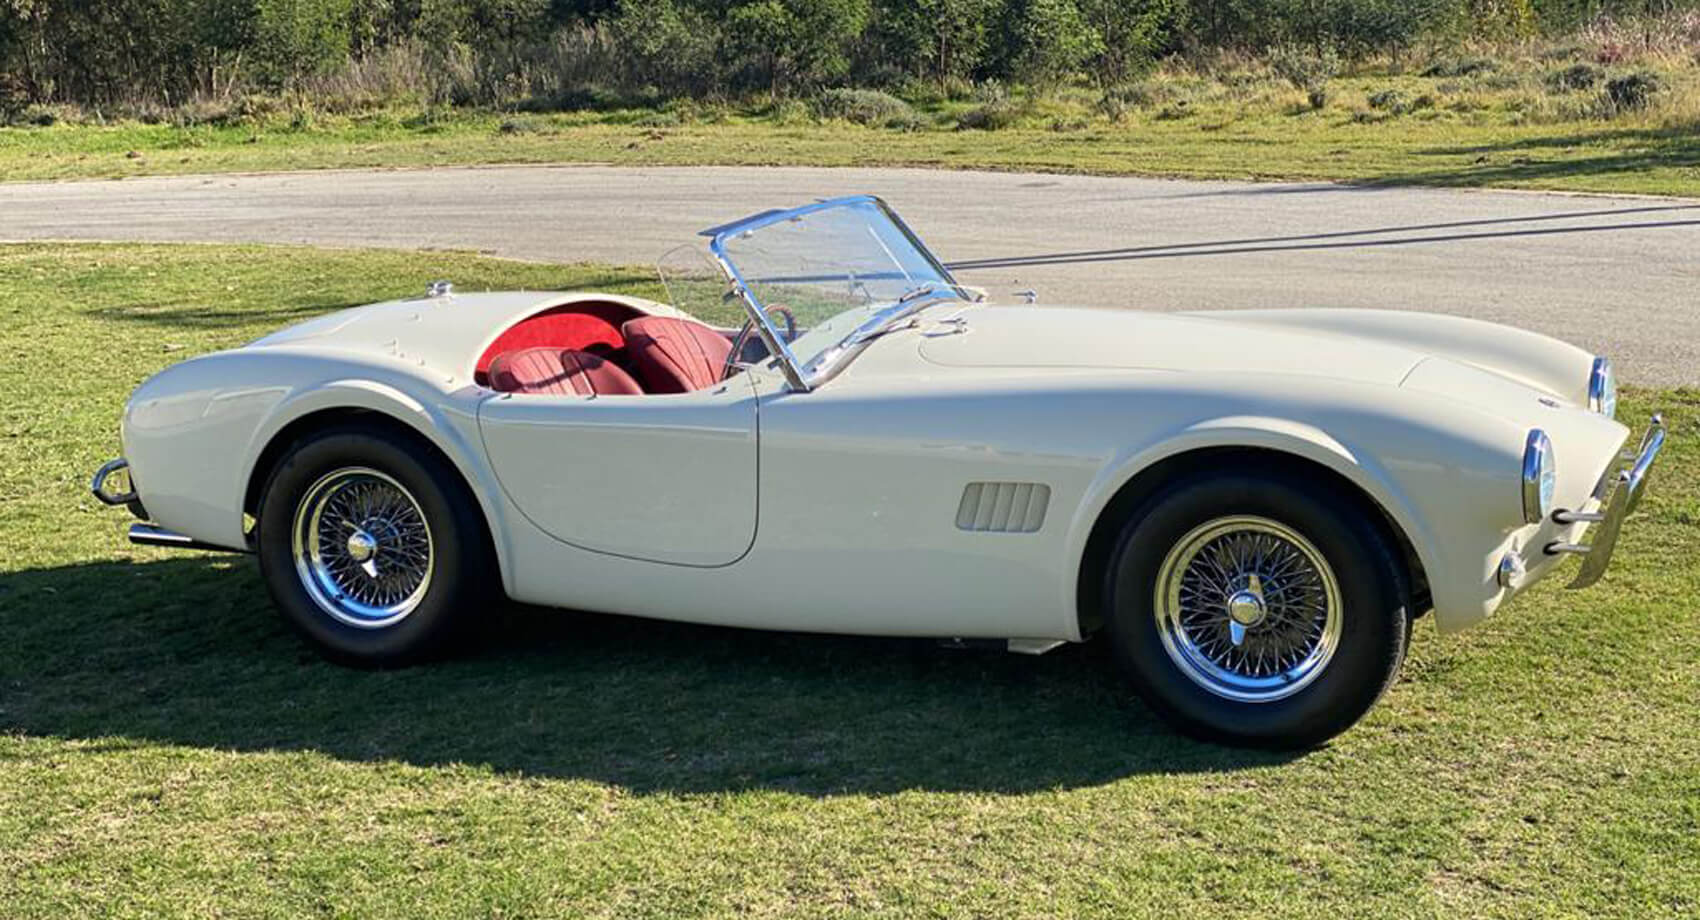 21 Ac Cobra Limited Series Launched With Electric And Ice Options Carscoops